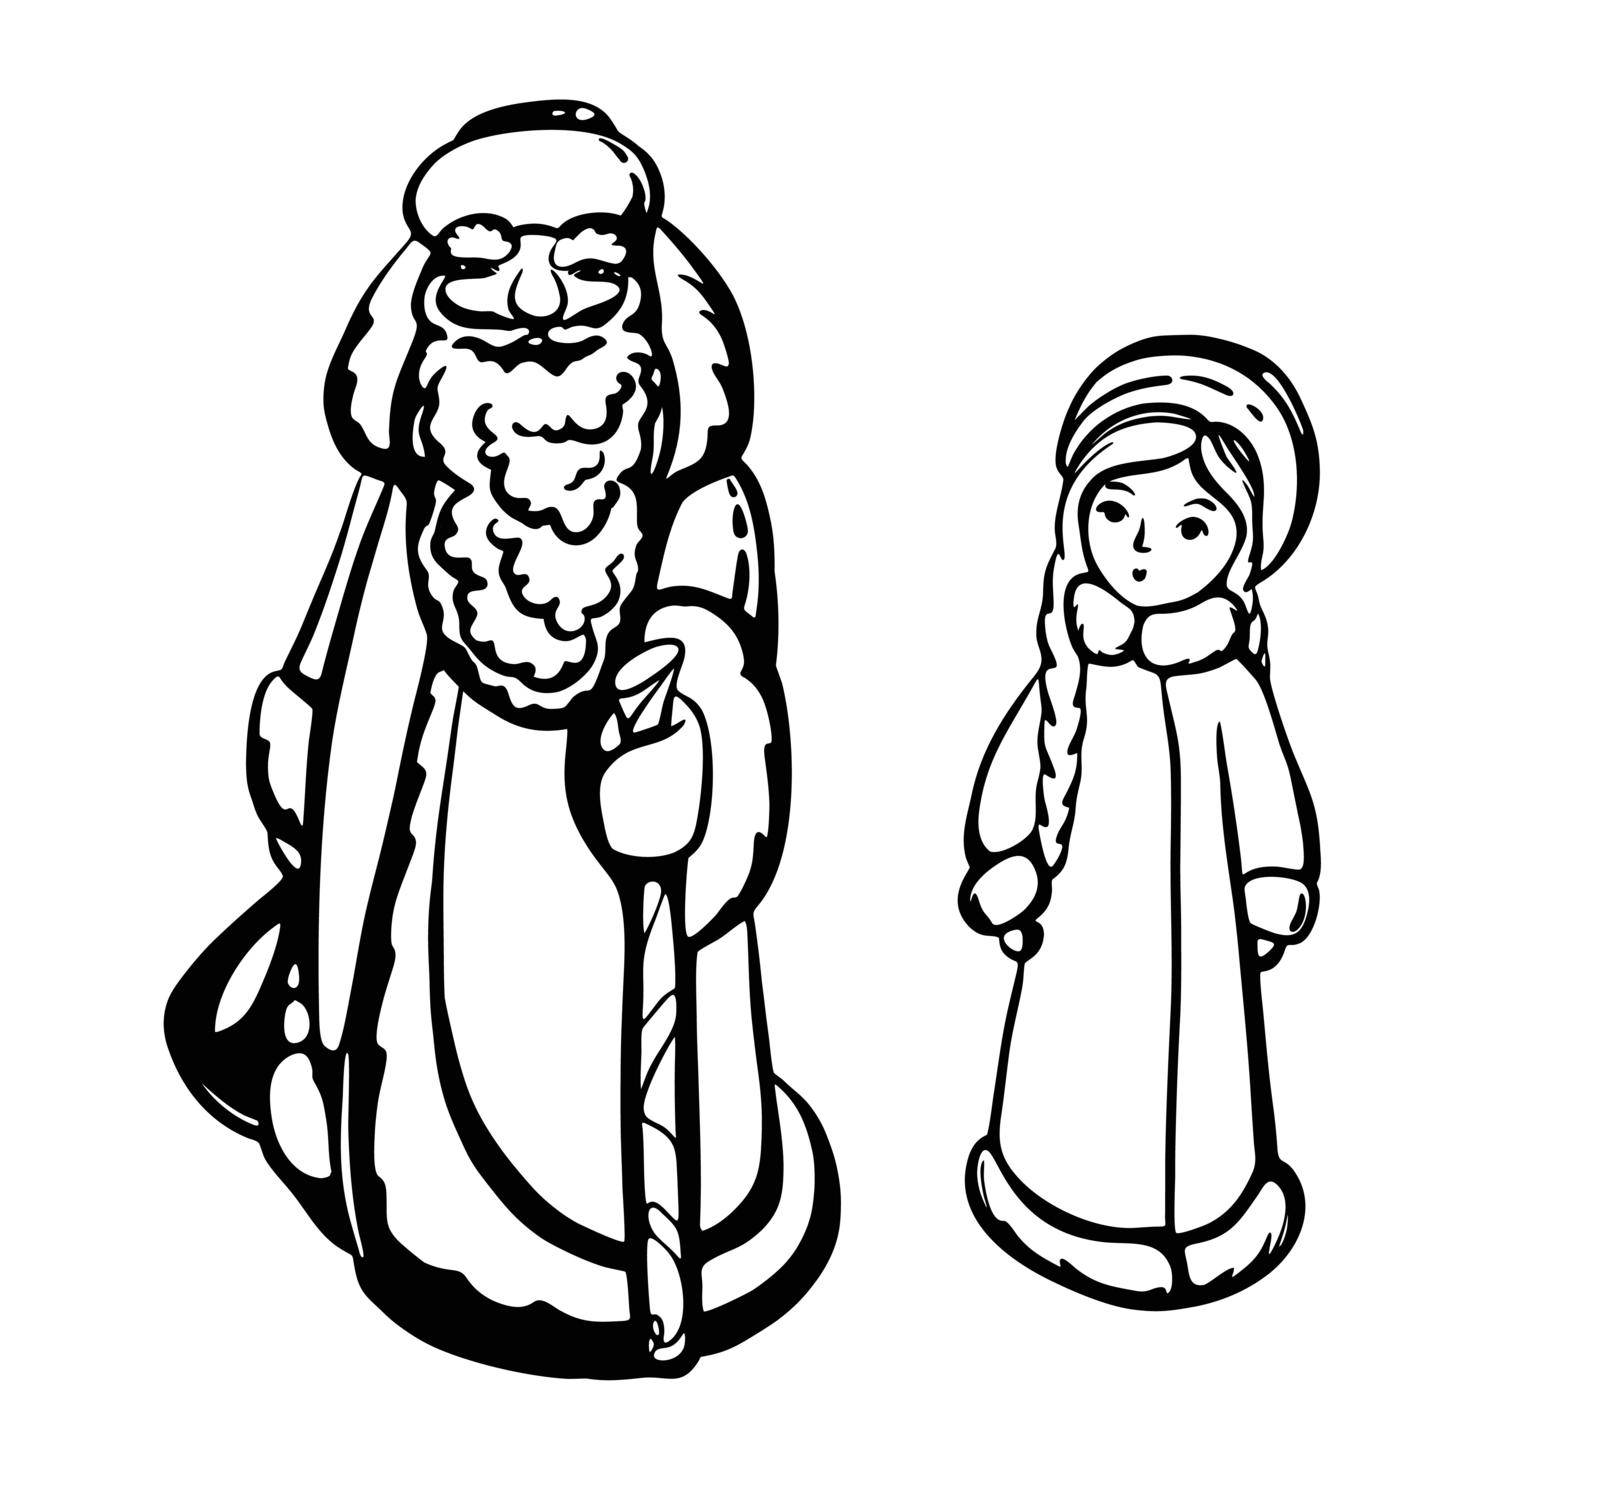 Silhouettes of Santa Claus and snow Maiden in black and white isolated on a white background vector